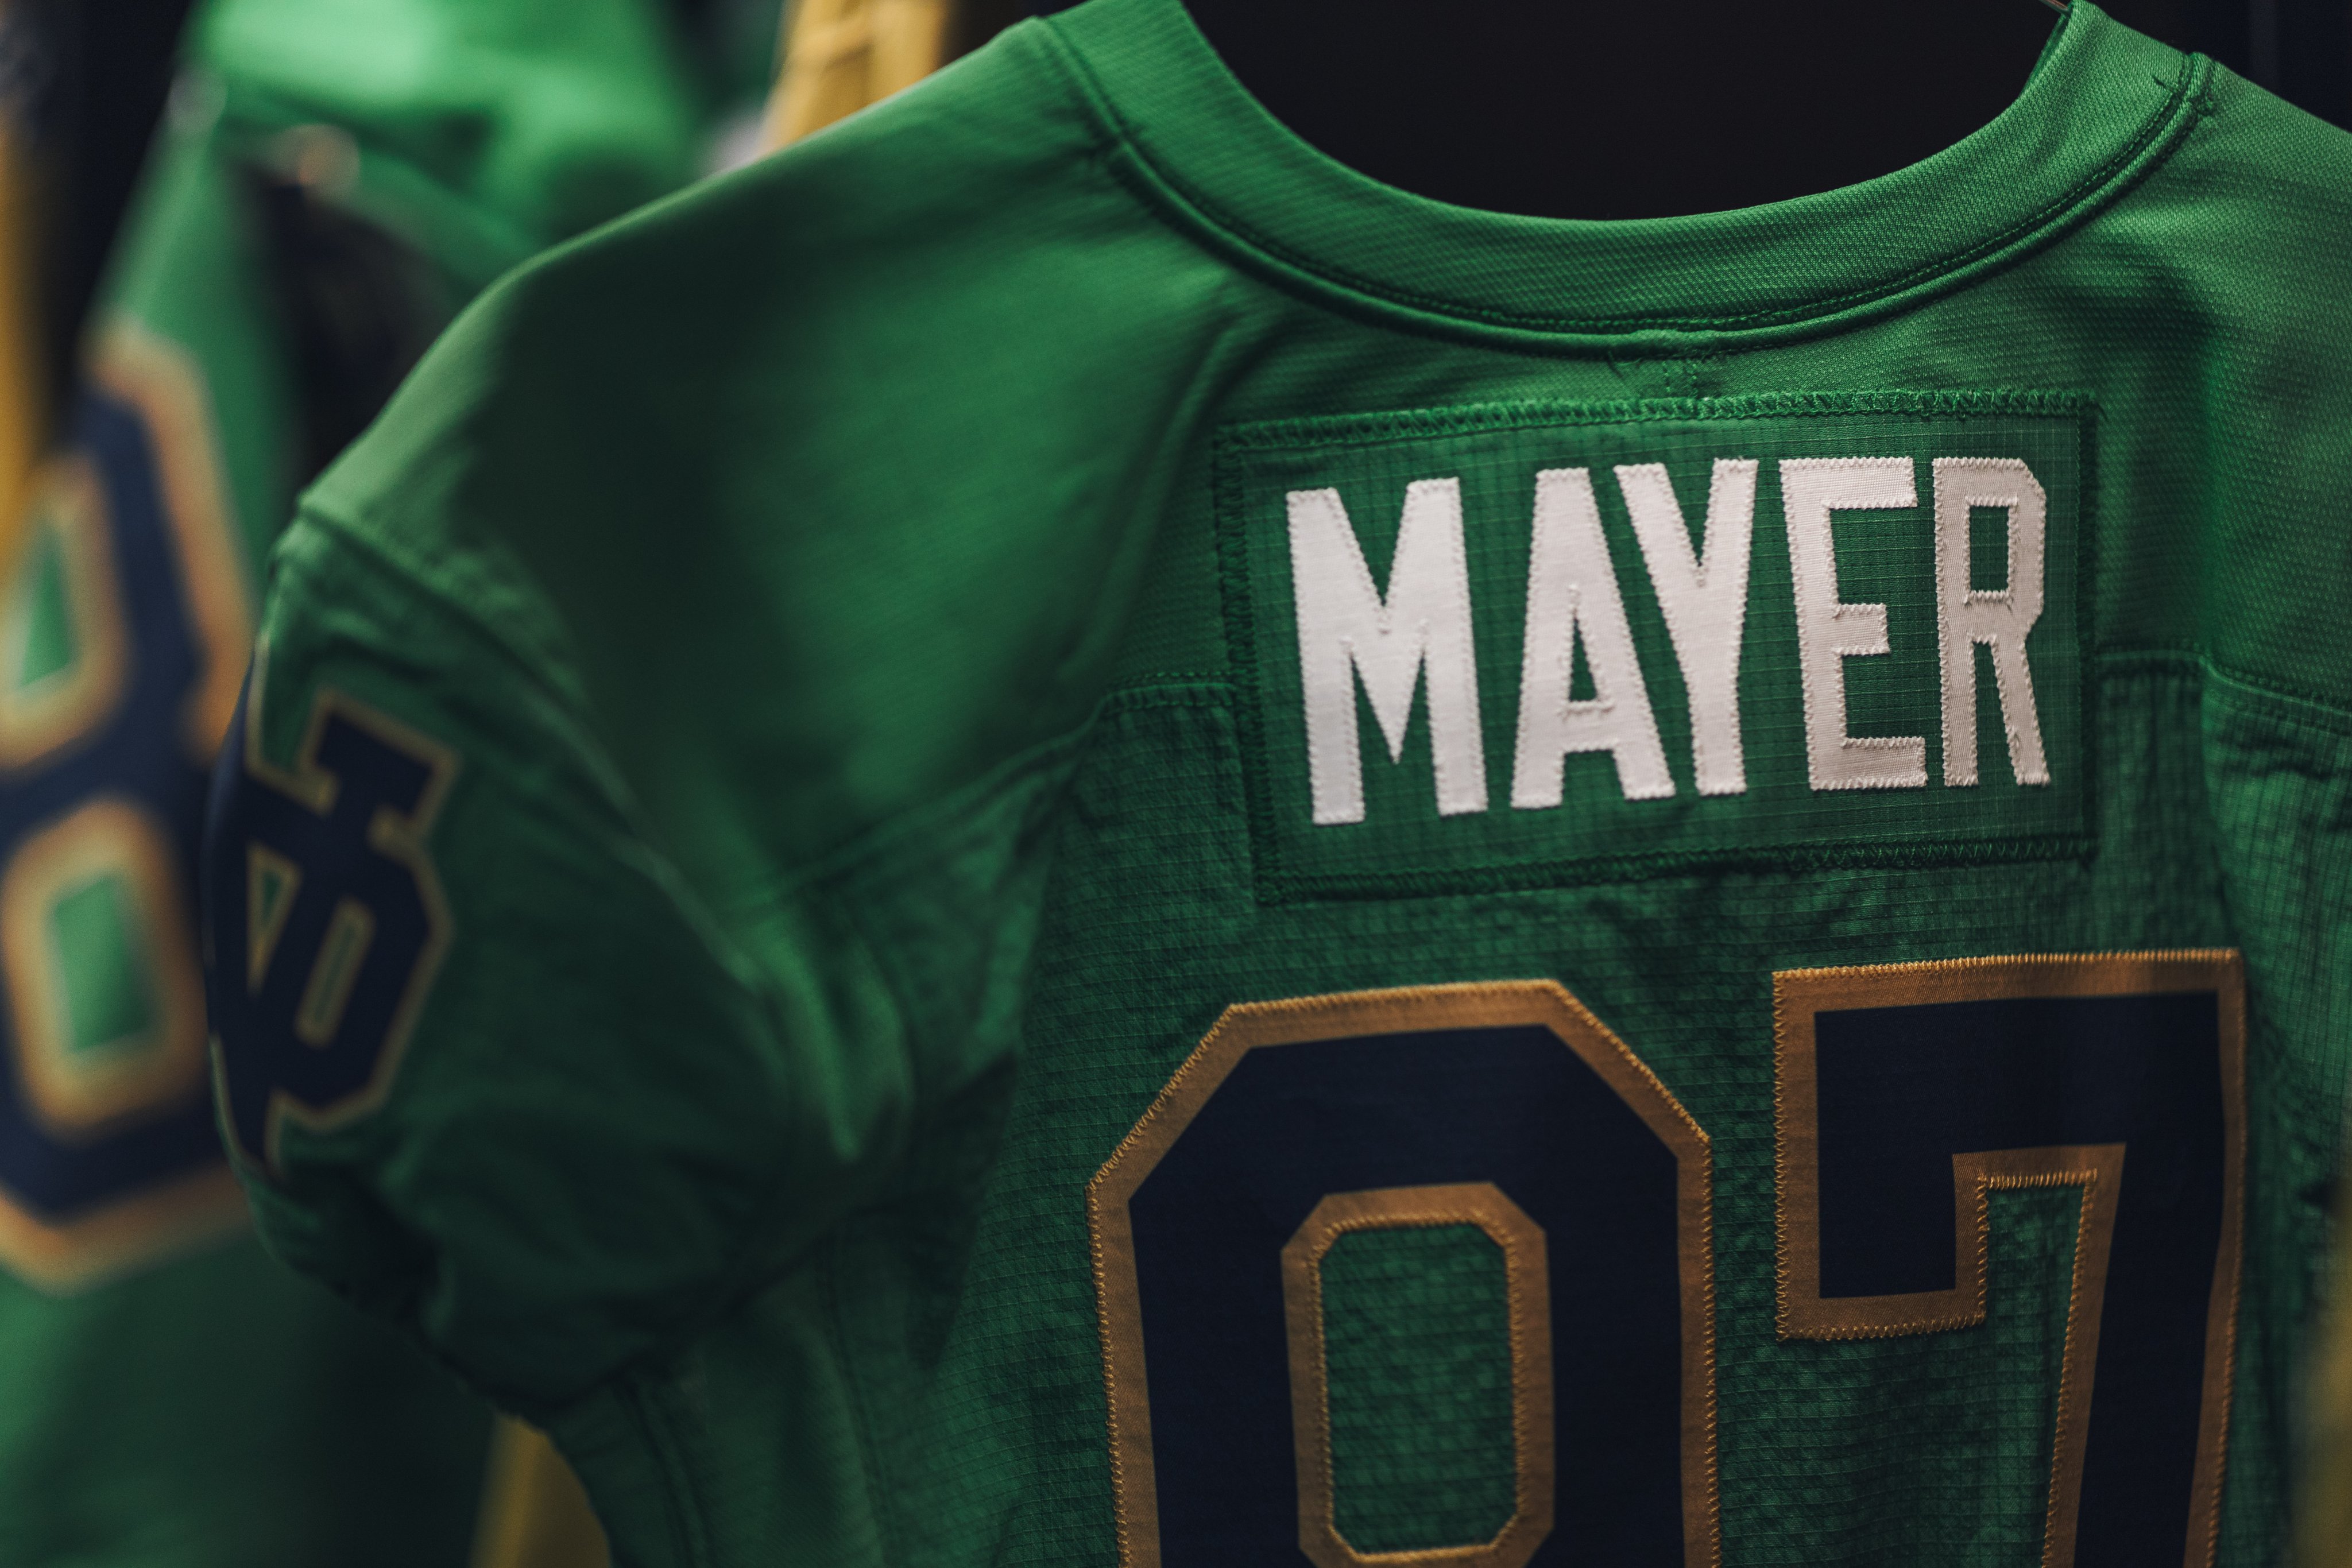 Notre Dame is showing us the green jerseys